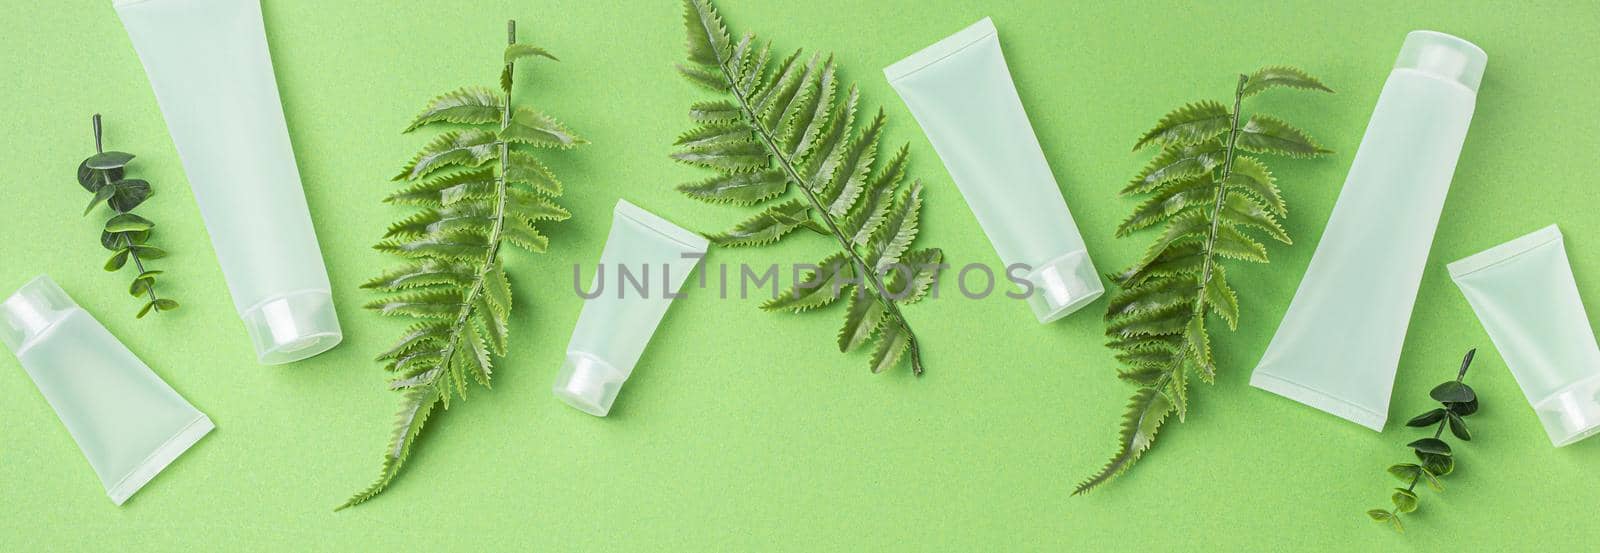 Skincare organic beauty product bottles, plant leaves on green background by its_al_dente